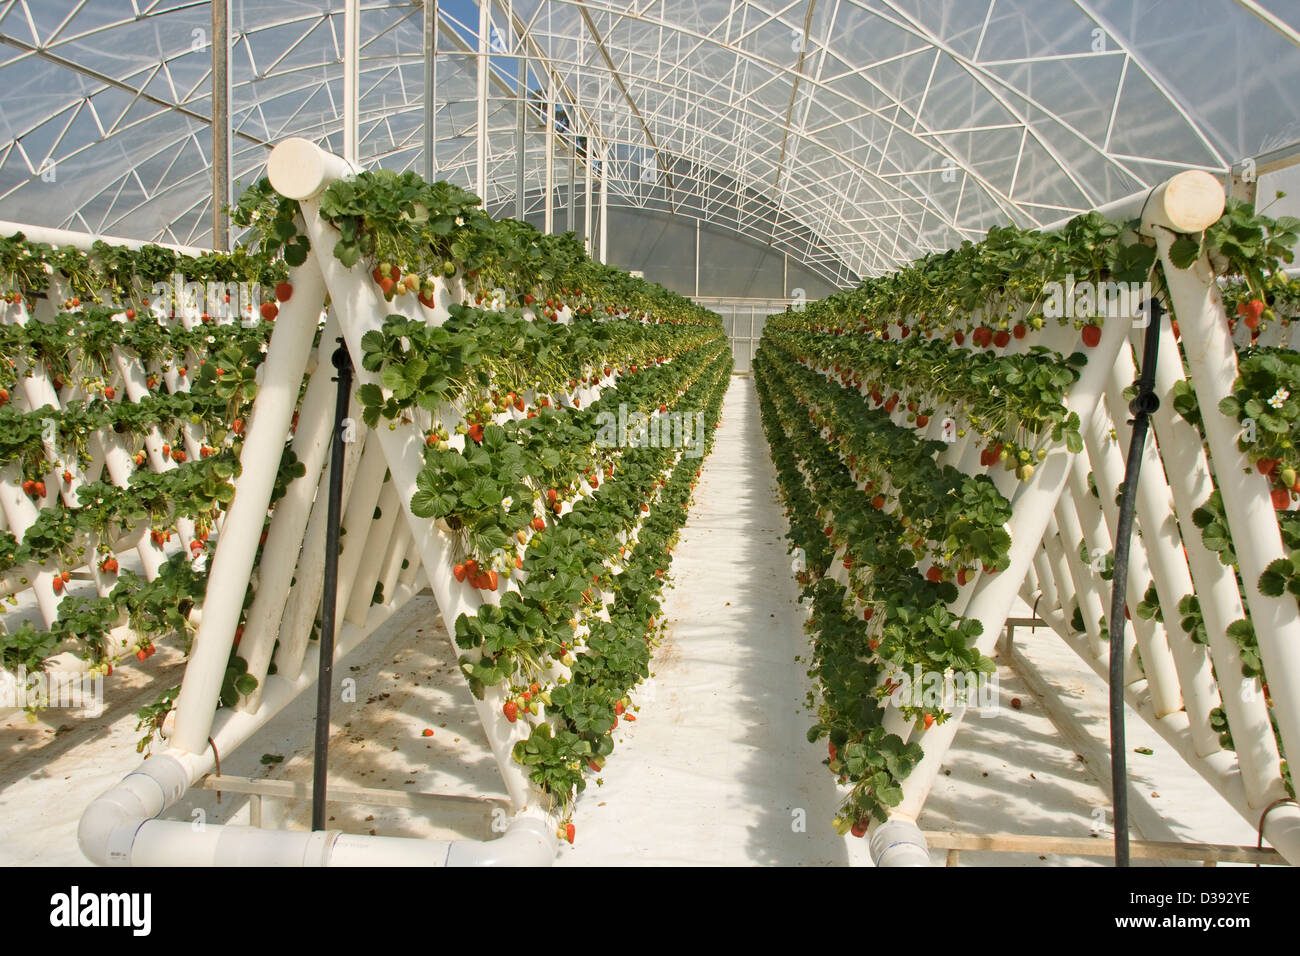 Rows of ripe red strawberries and foliage of plants ...